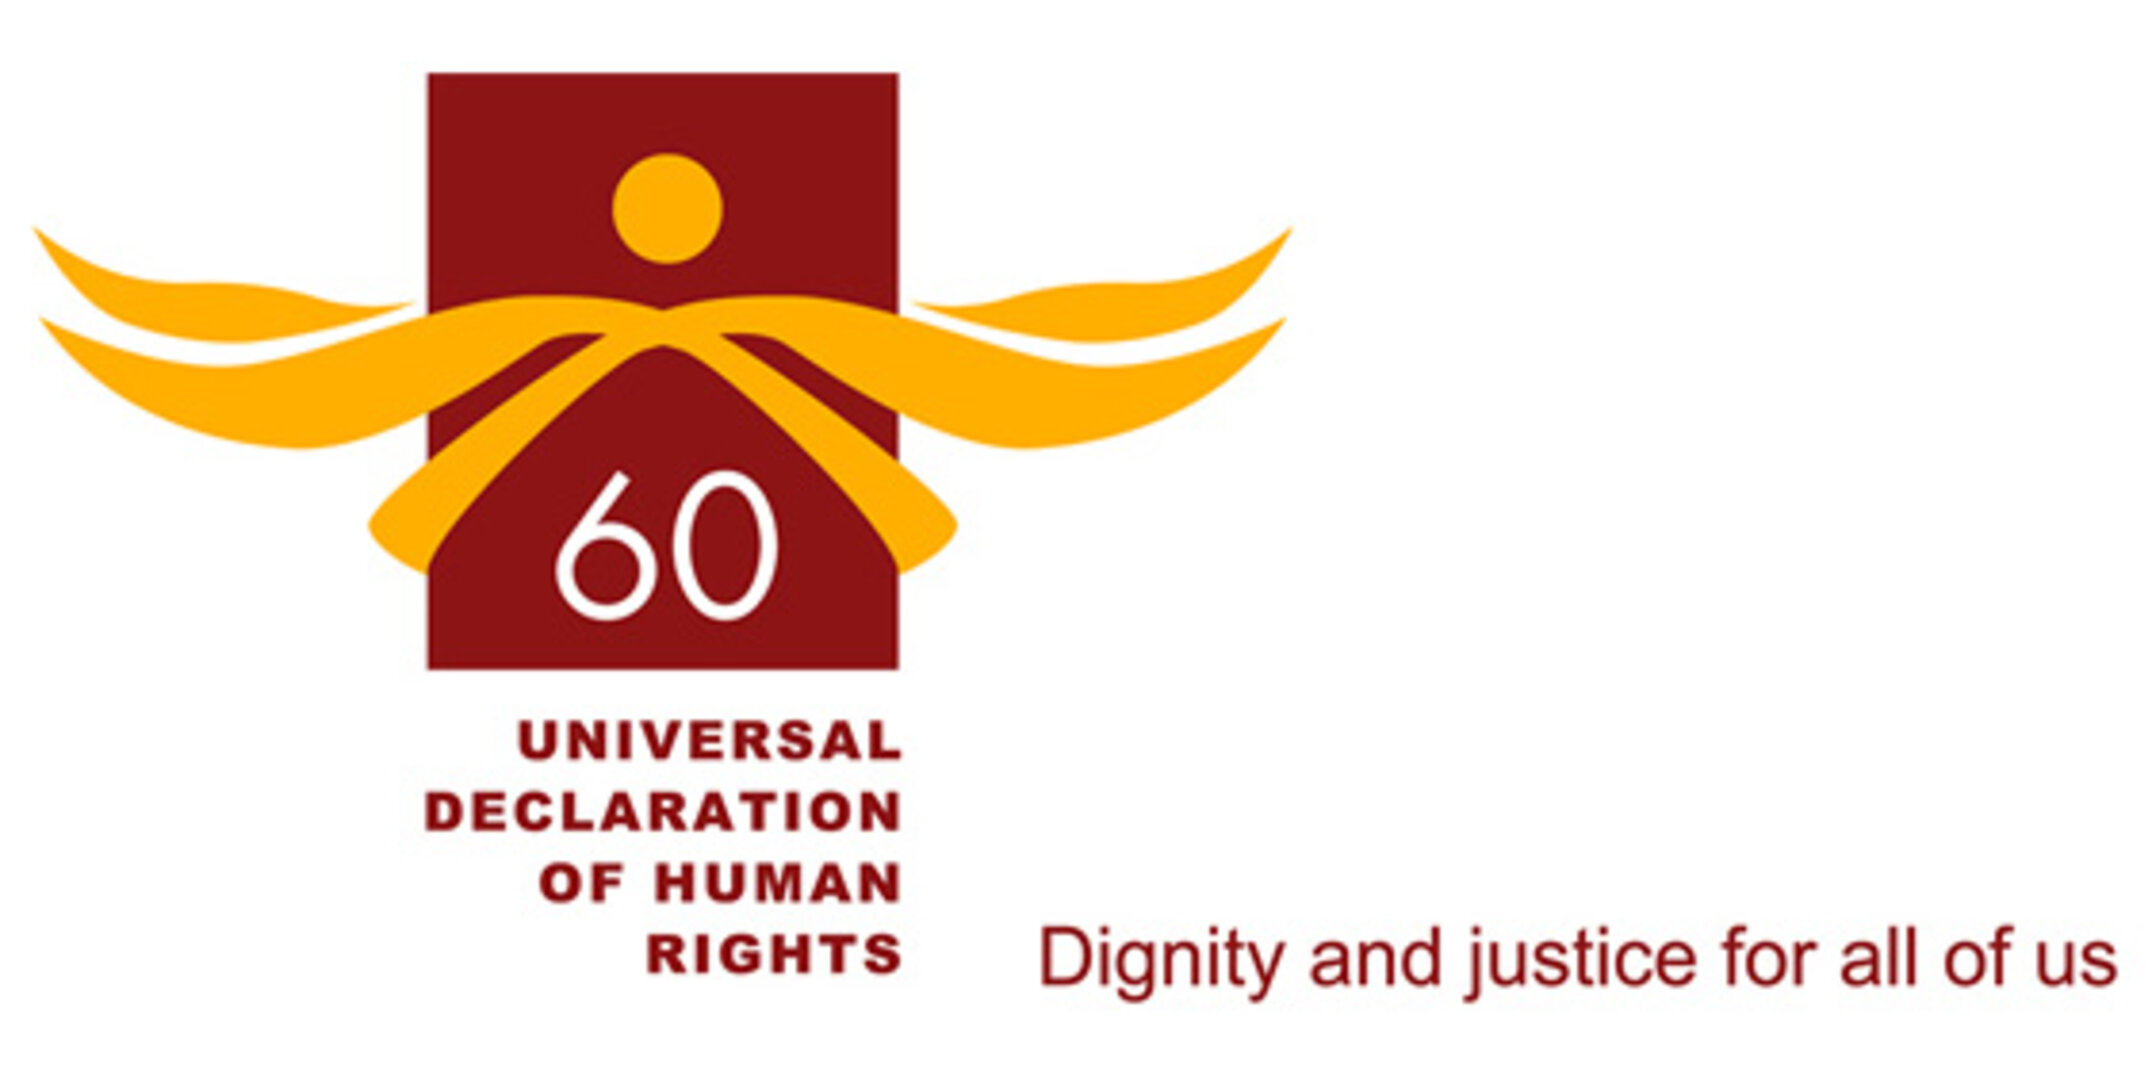 The Universal Declaration of Human Rights turns 60 on 10 December 2008